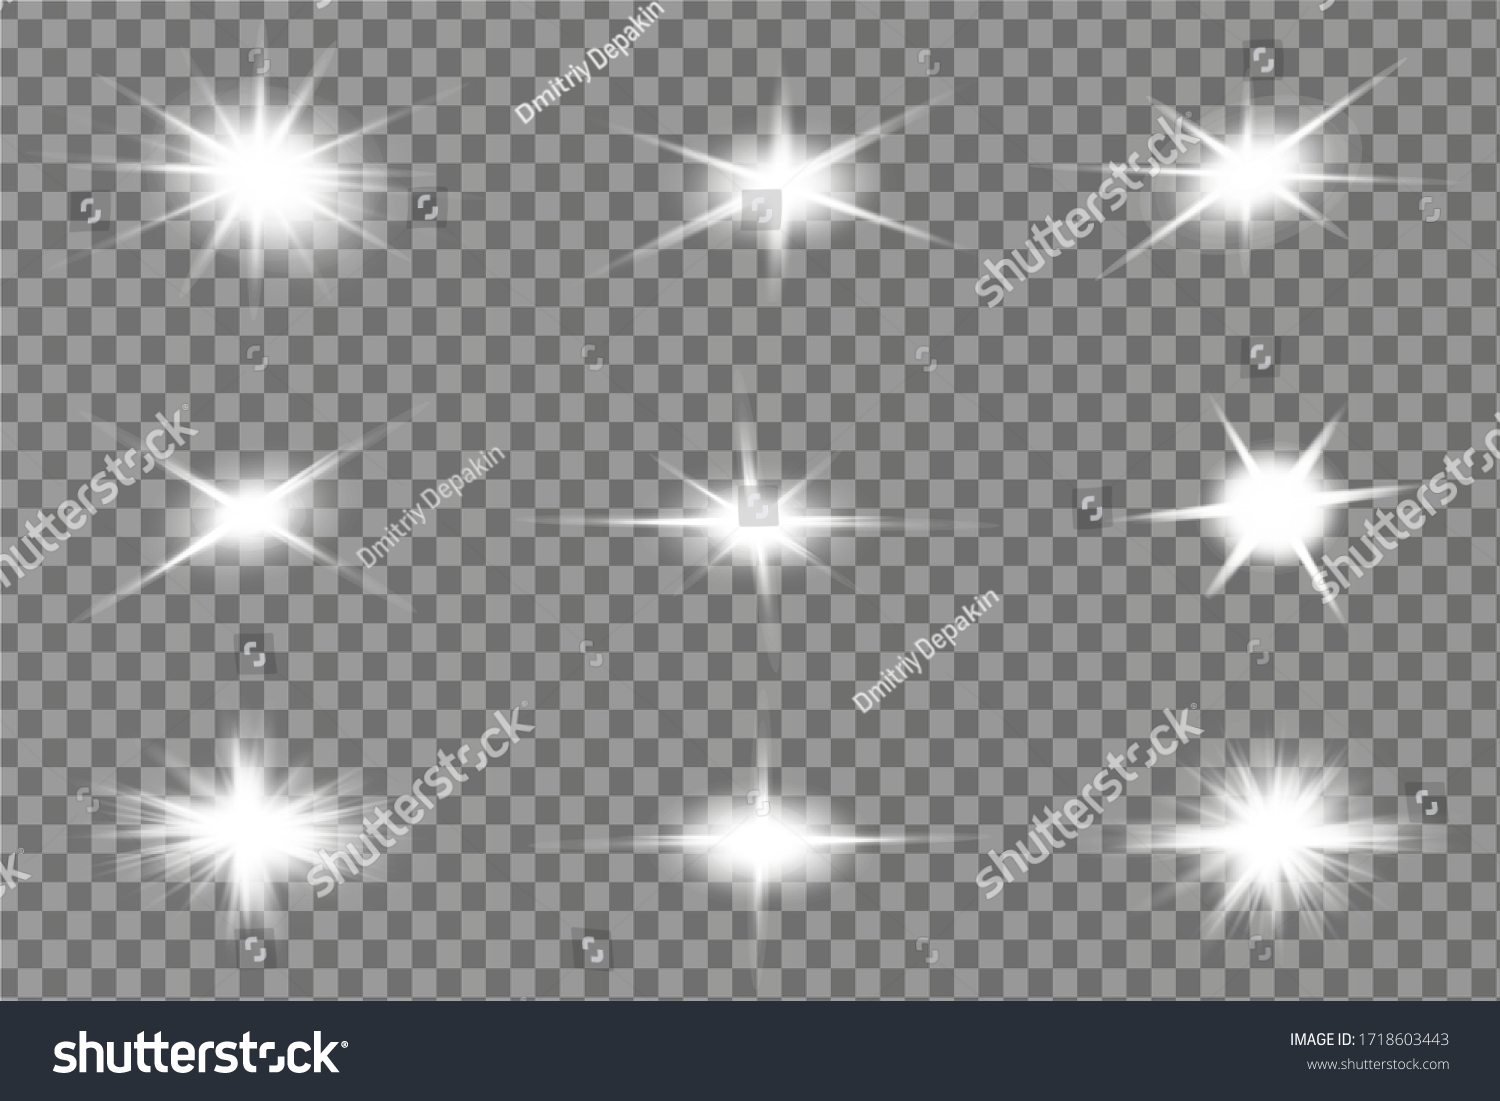 Glowing White Light Effect Vector Illustration Stock Vector (Royalty ...